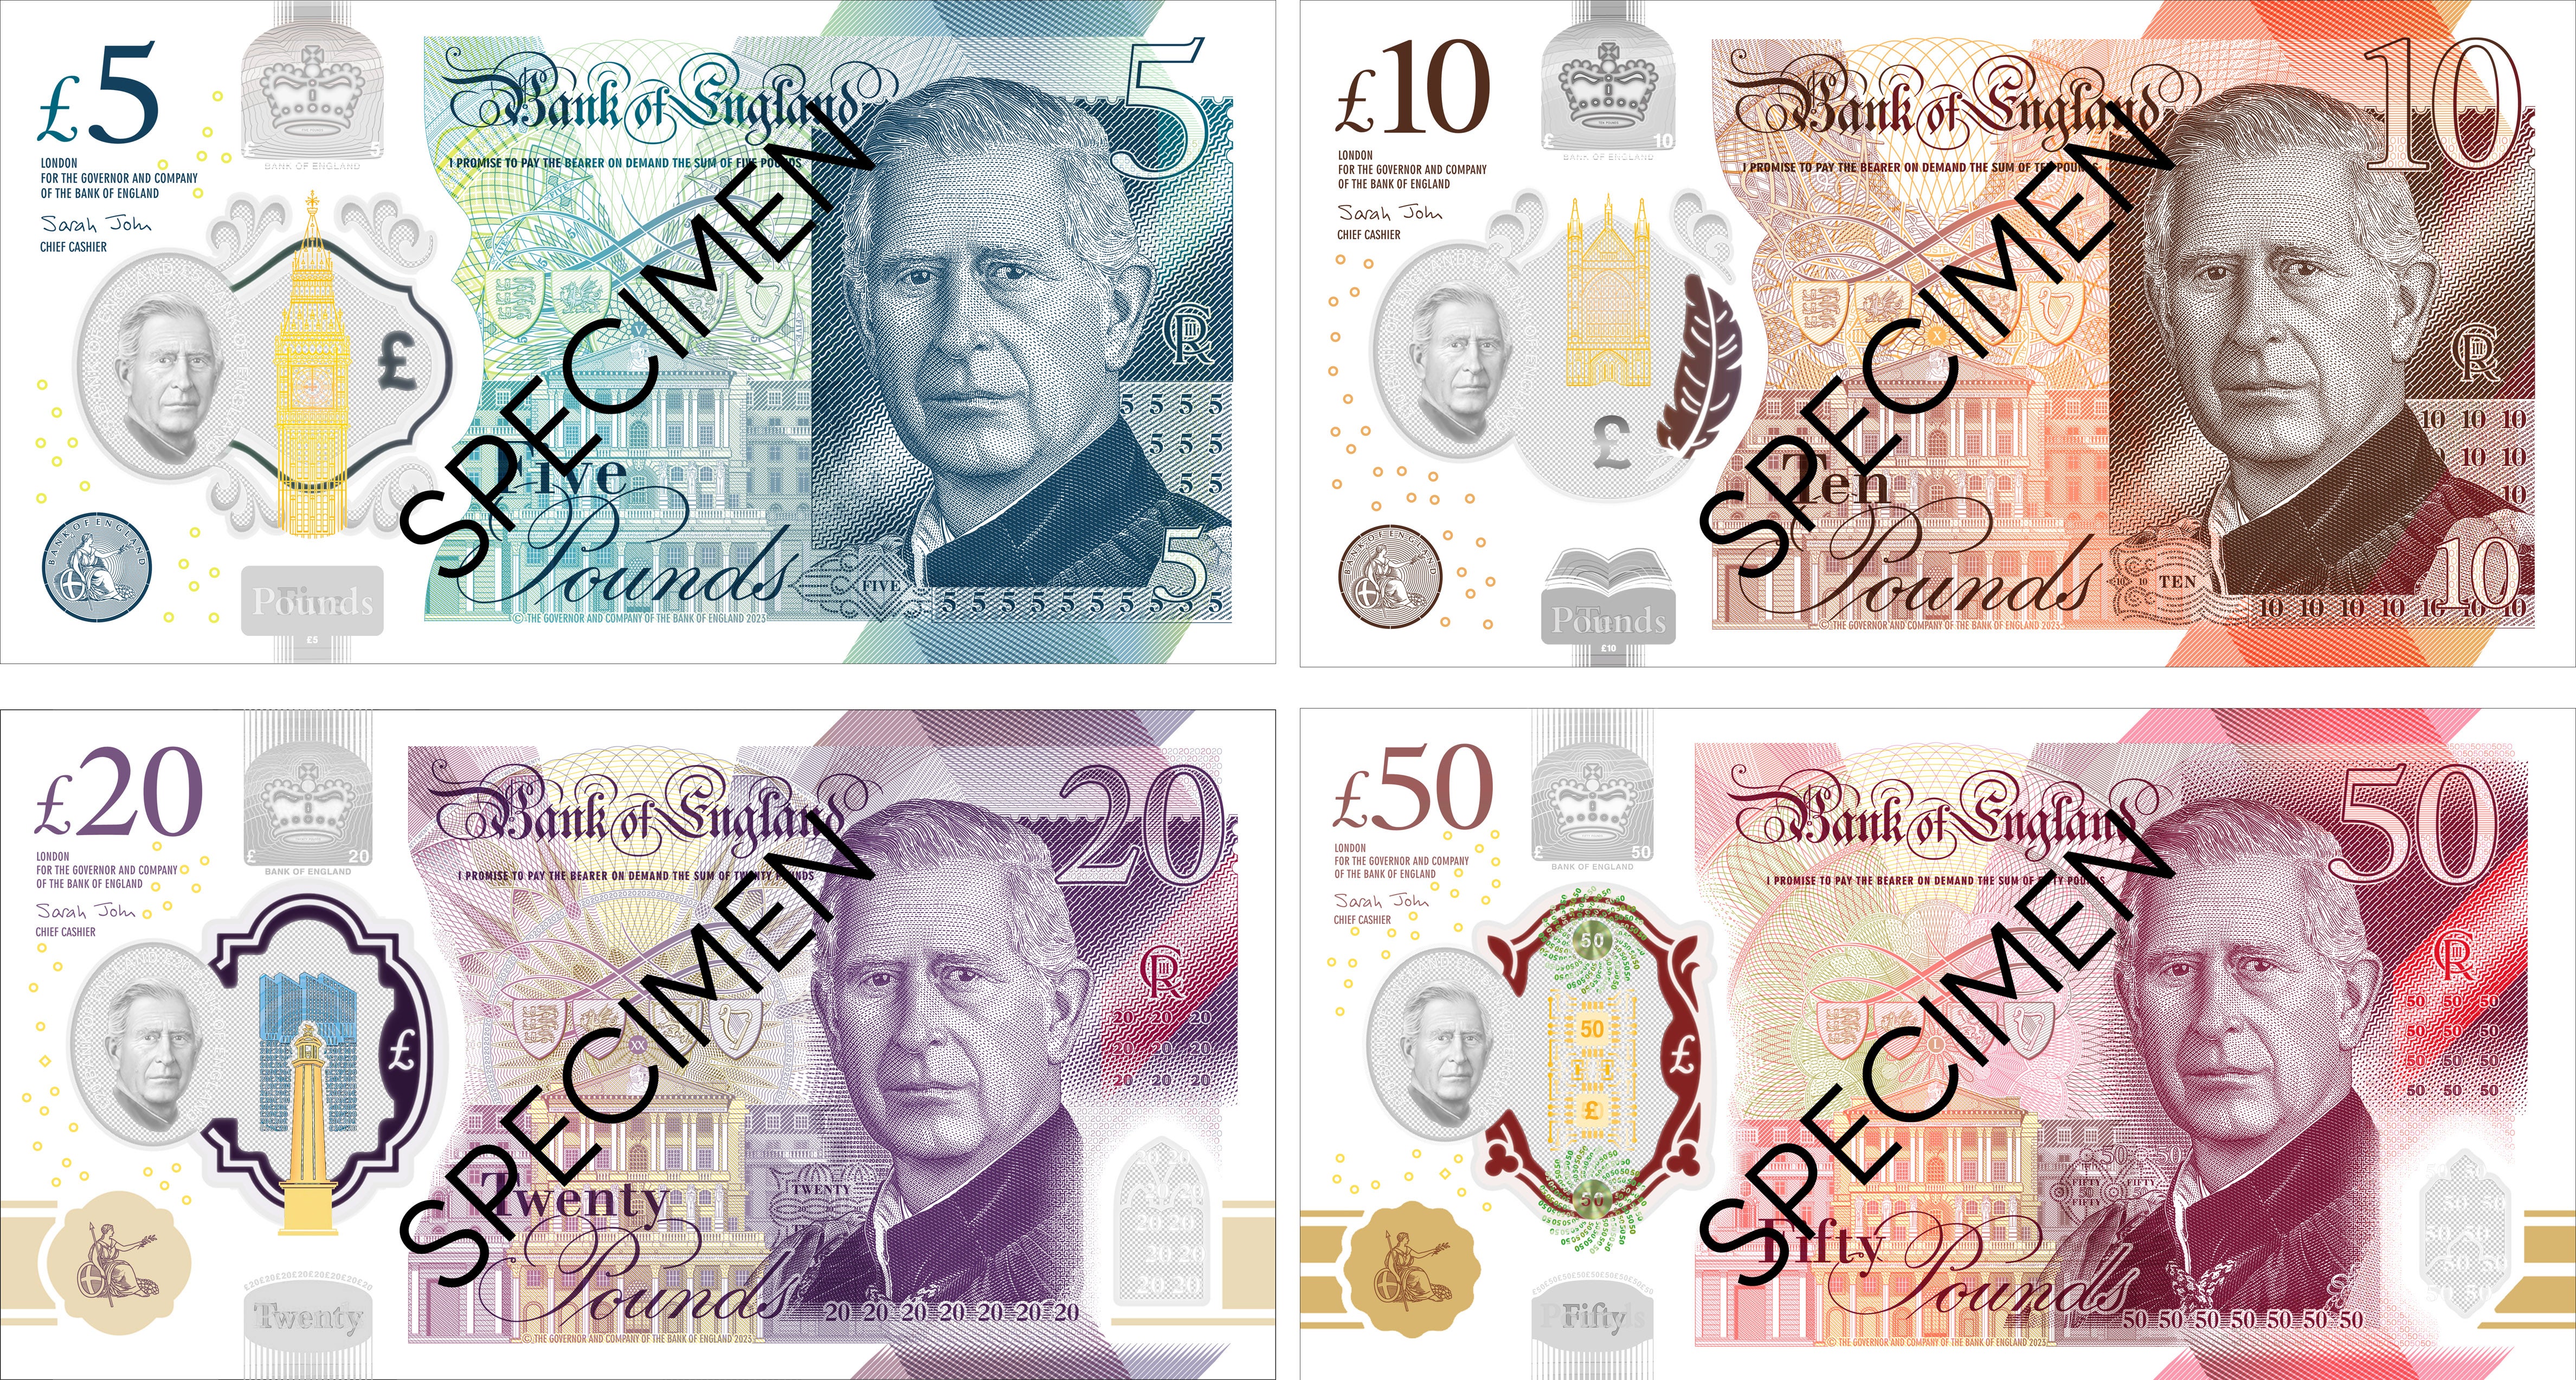 The new bank notes